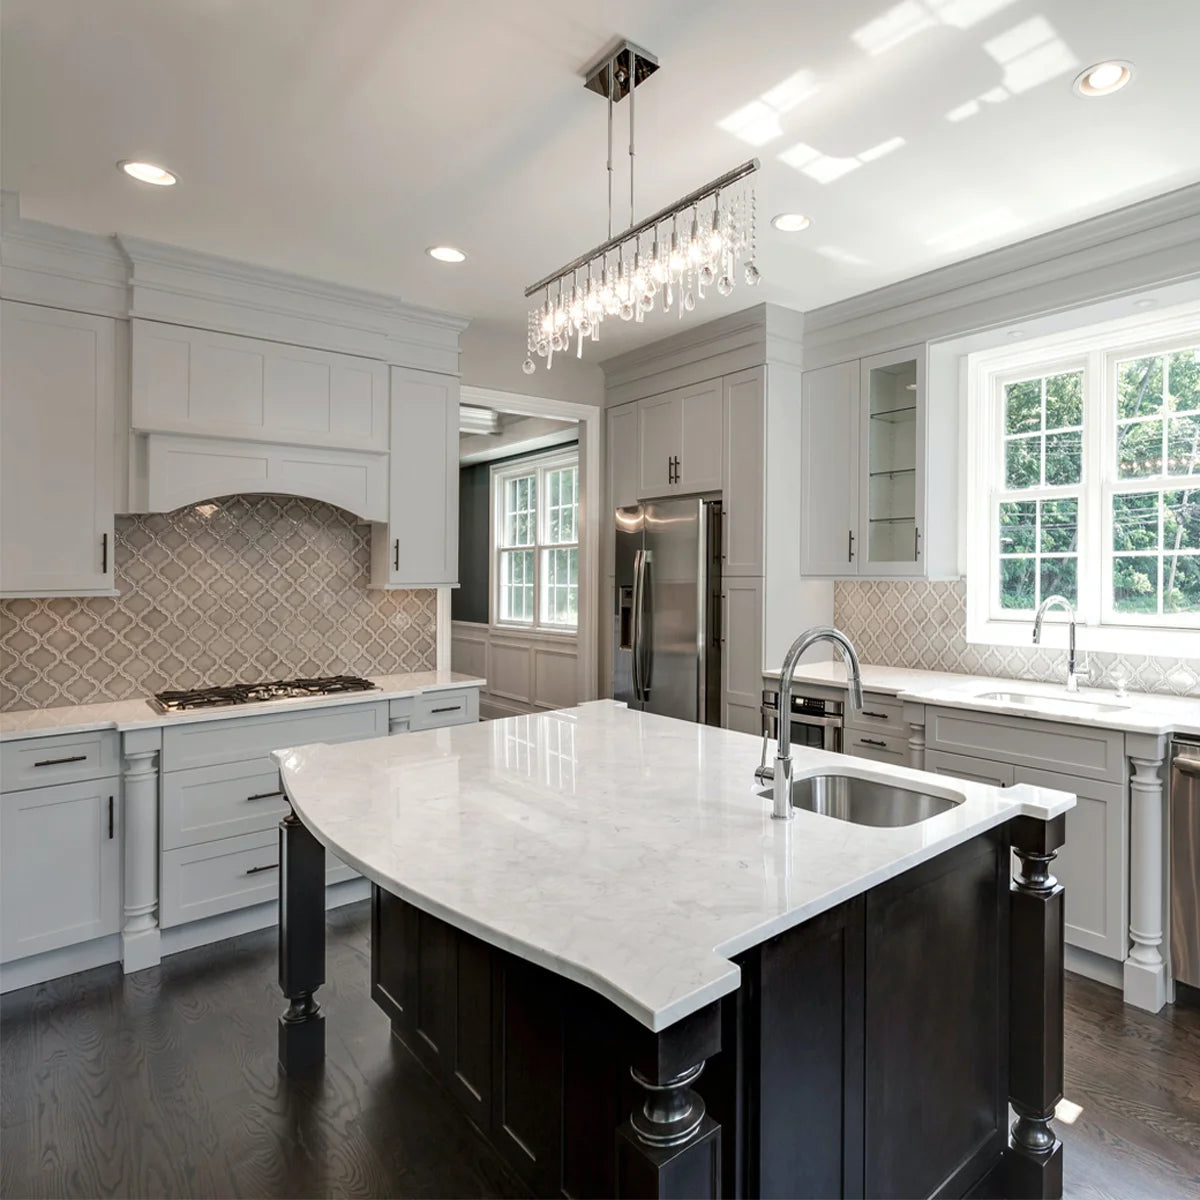 How to Choose the Right Countertop Material for Your Kitchen Remodel